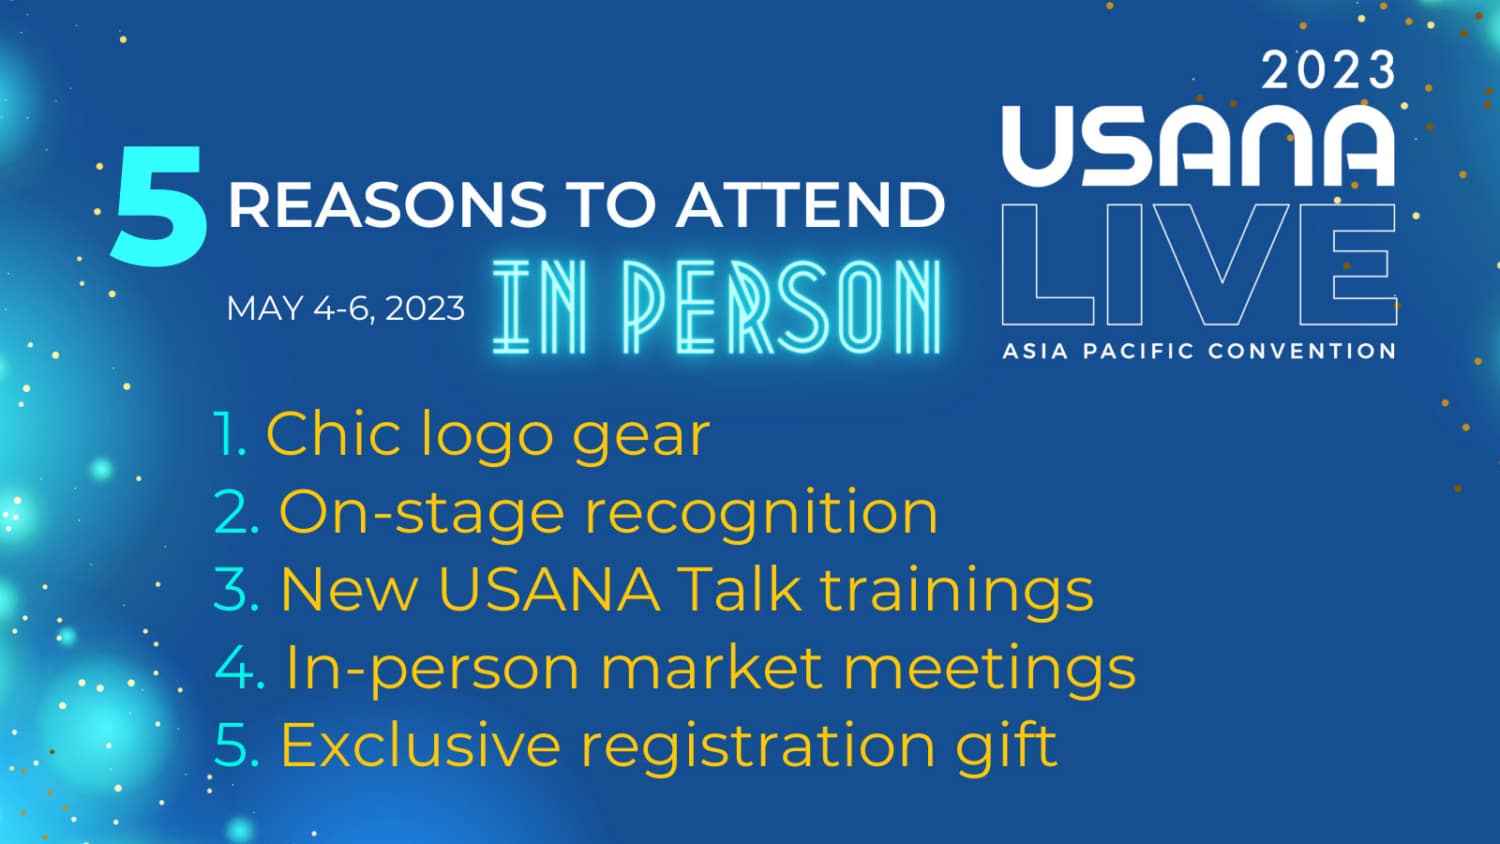 Register Today: 2023 USANA Asia Pacific Convention